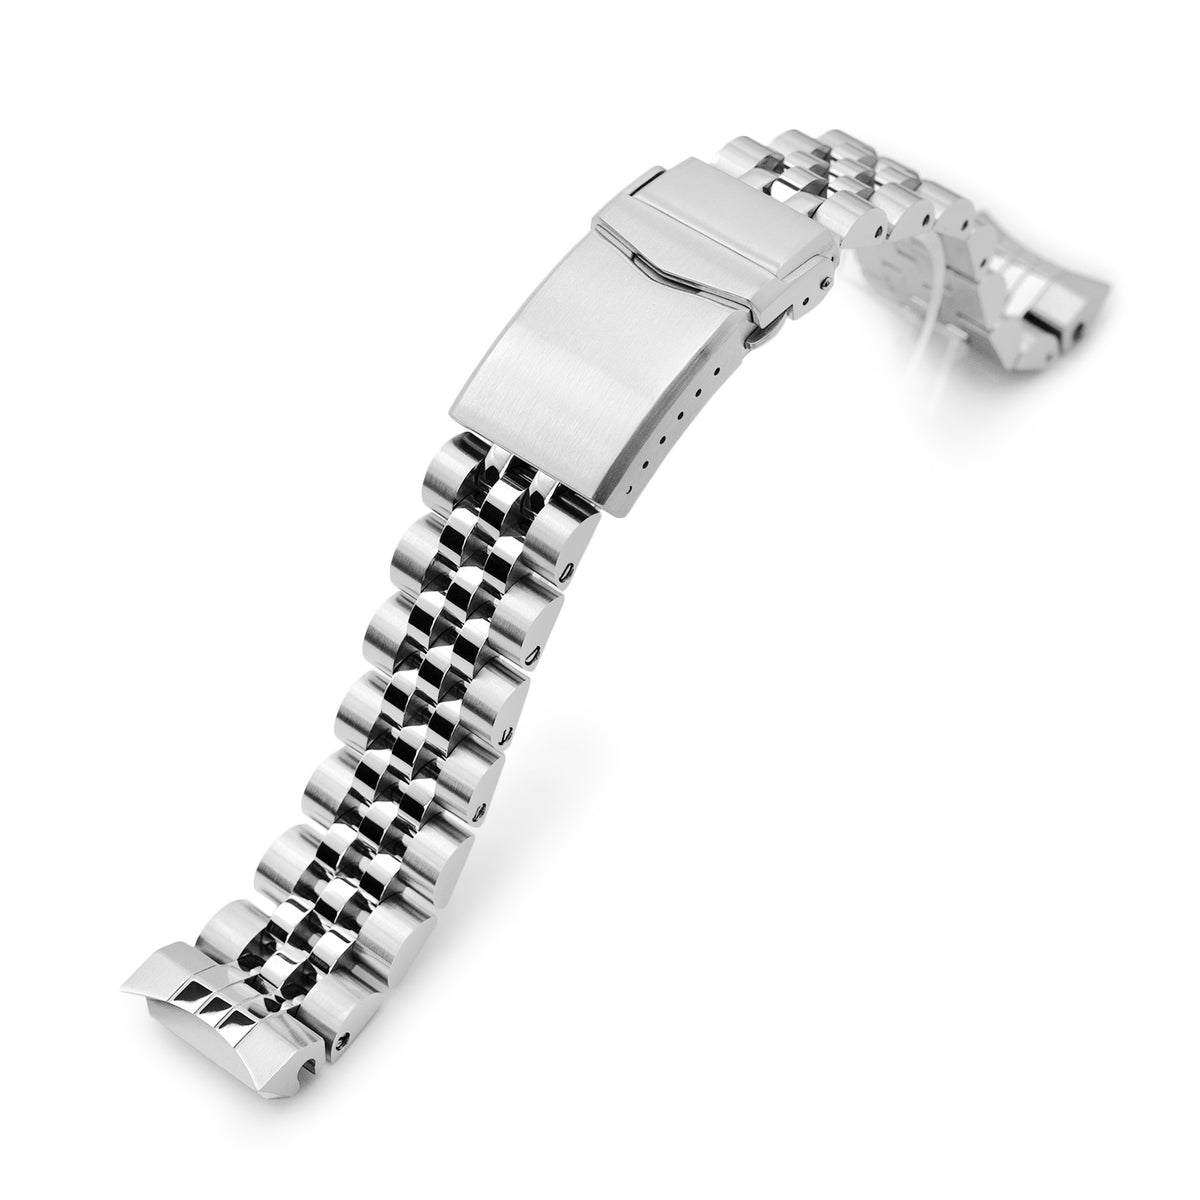 20mm Angus-J Louis JUB Watch Band compatible with Seiko MM300 Prospex Marinemaster SBDX001, 316L Stainless Steel Brushed/Polished V-Clasp